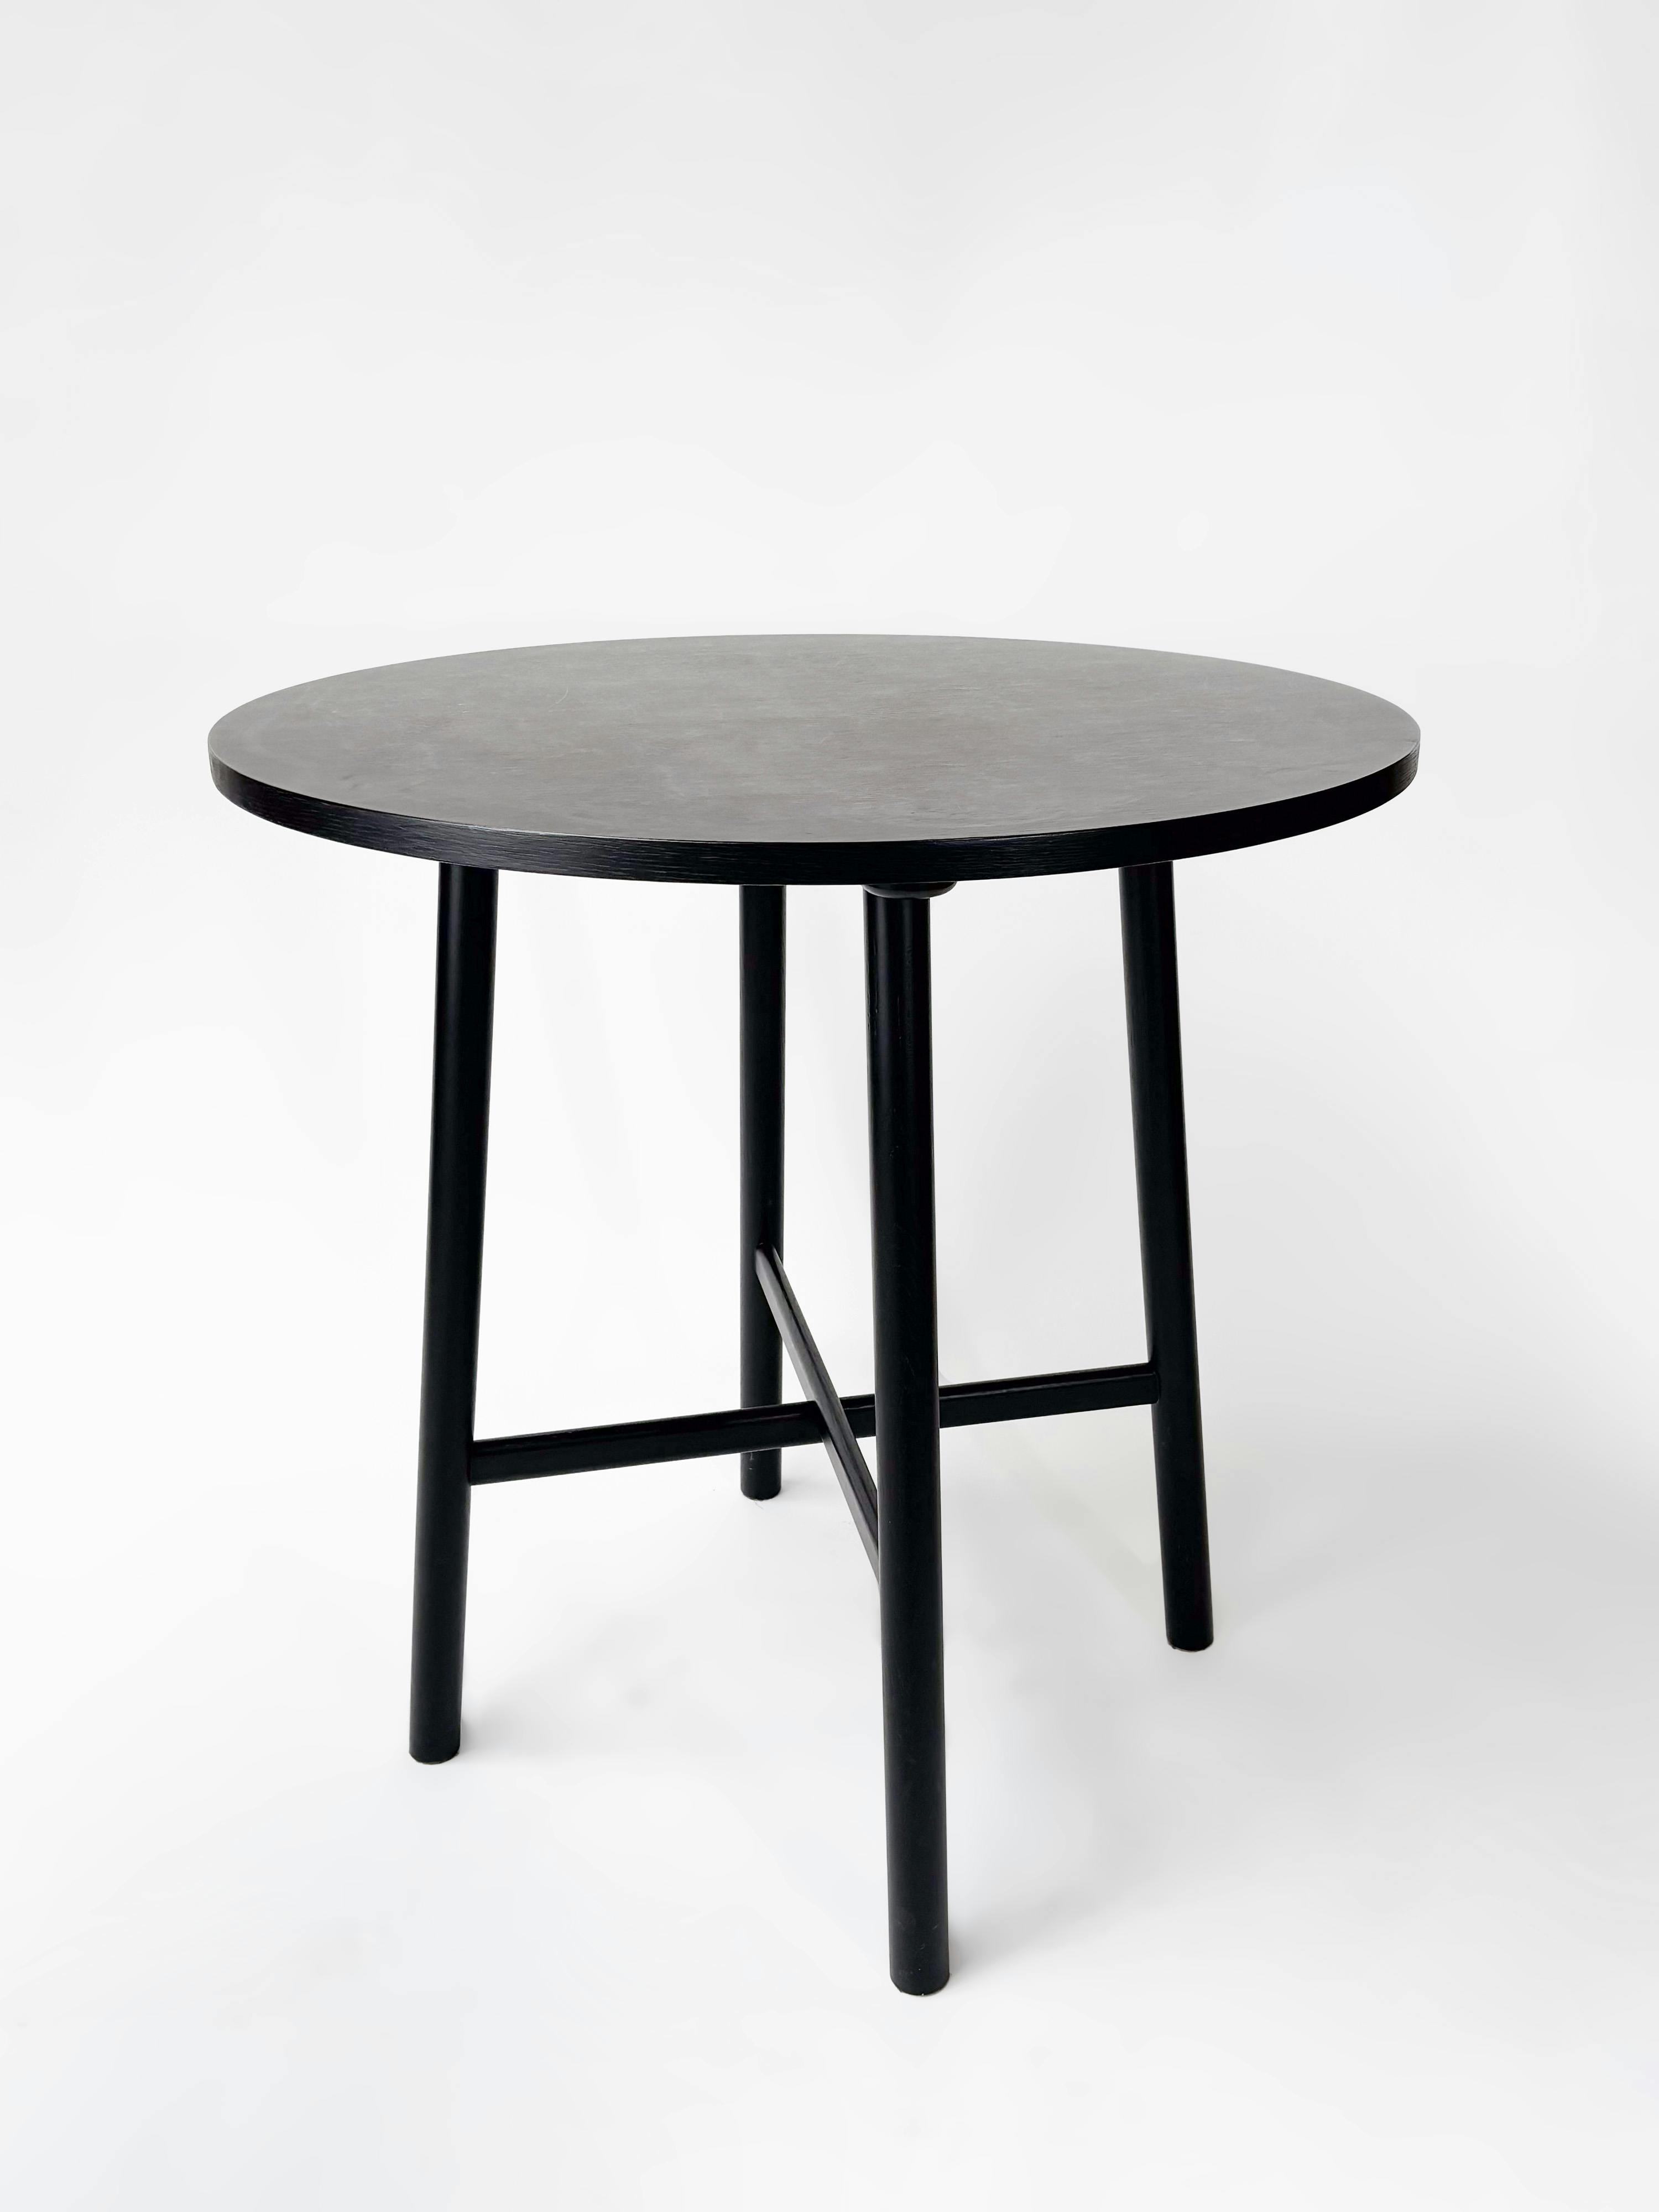 CRUSO High Round Black Wooden Table - 90cm - Relieve Furniture